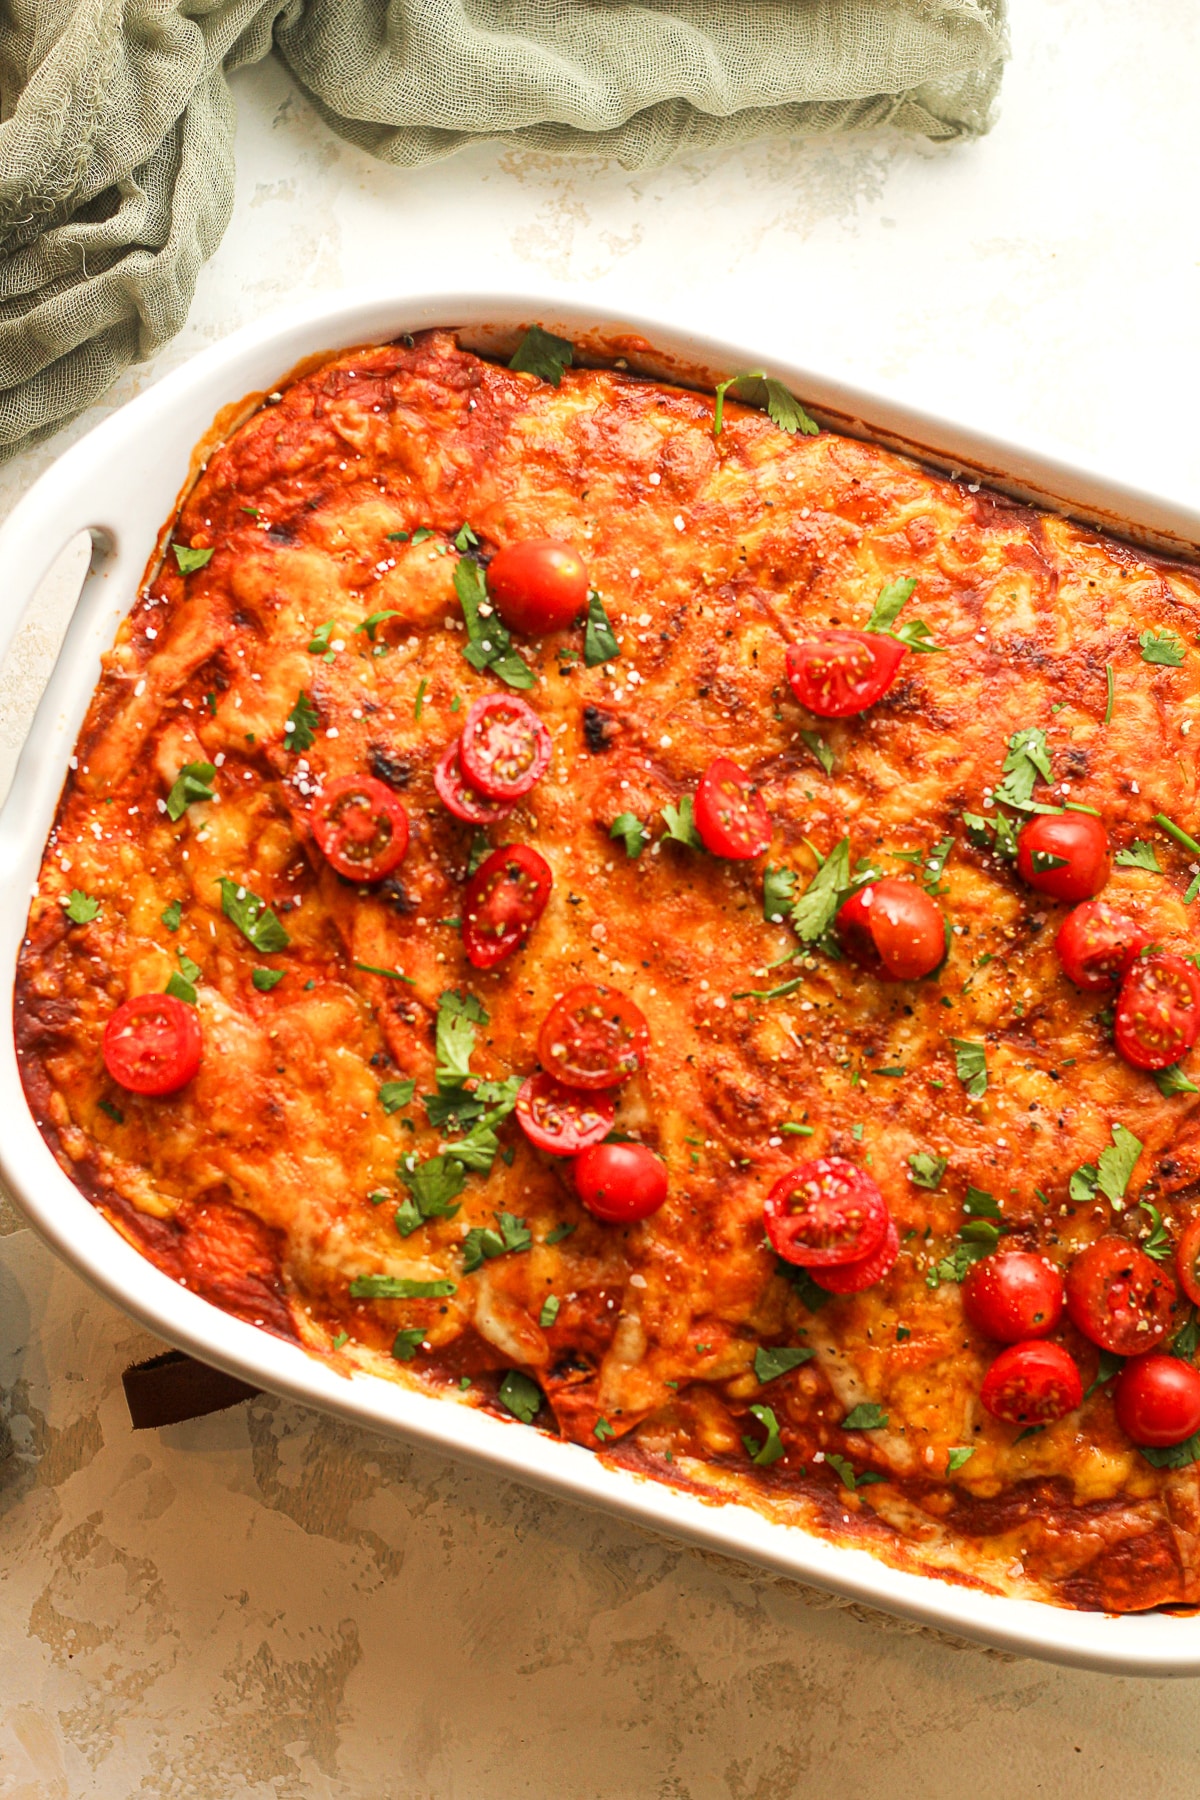 A portion of the casserole with tomatoes on top.